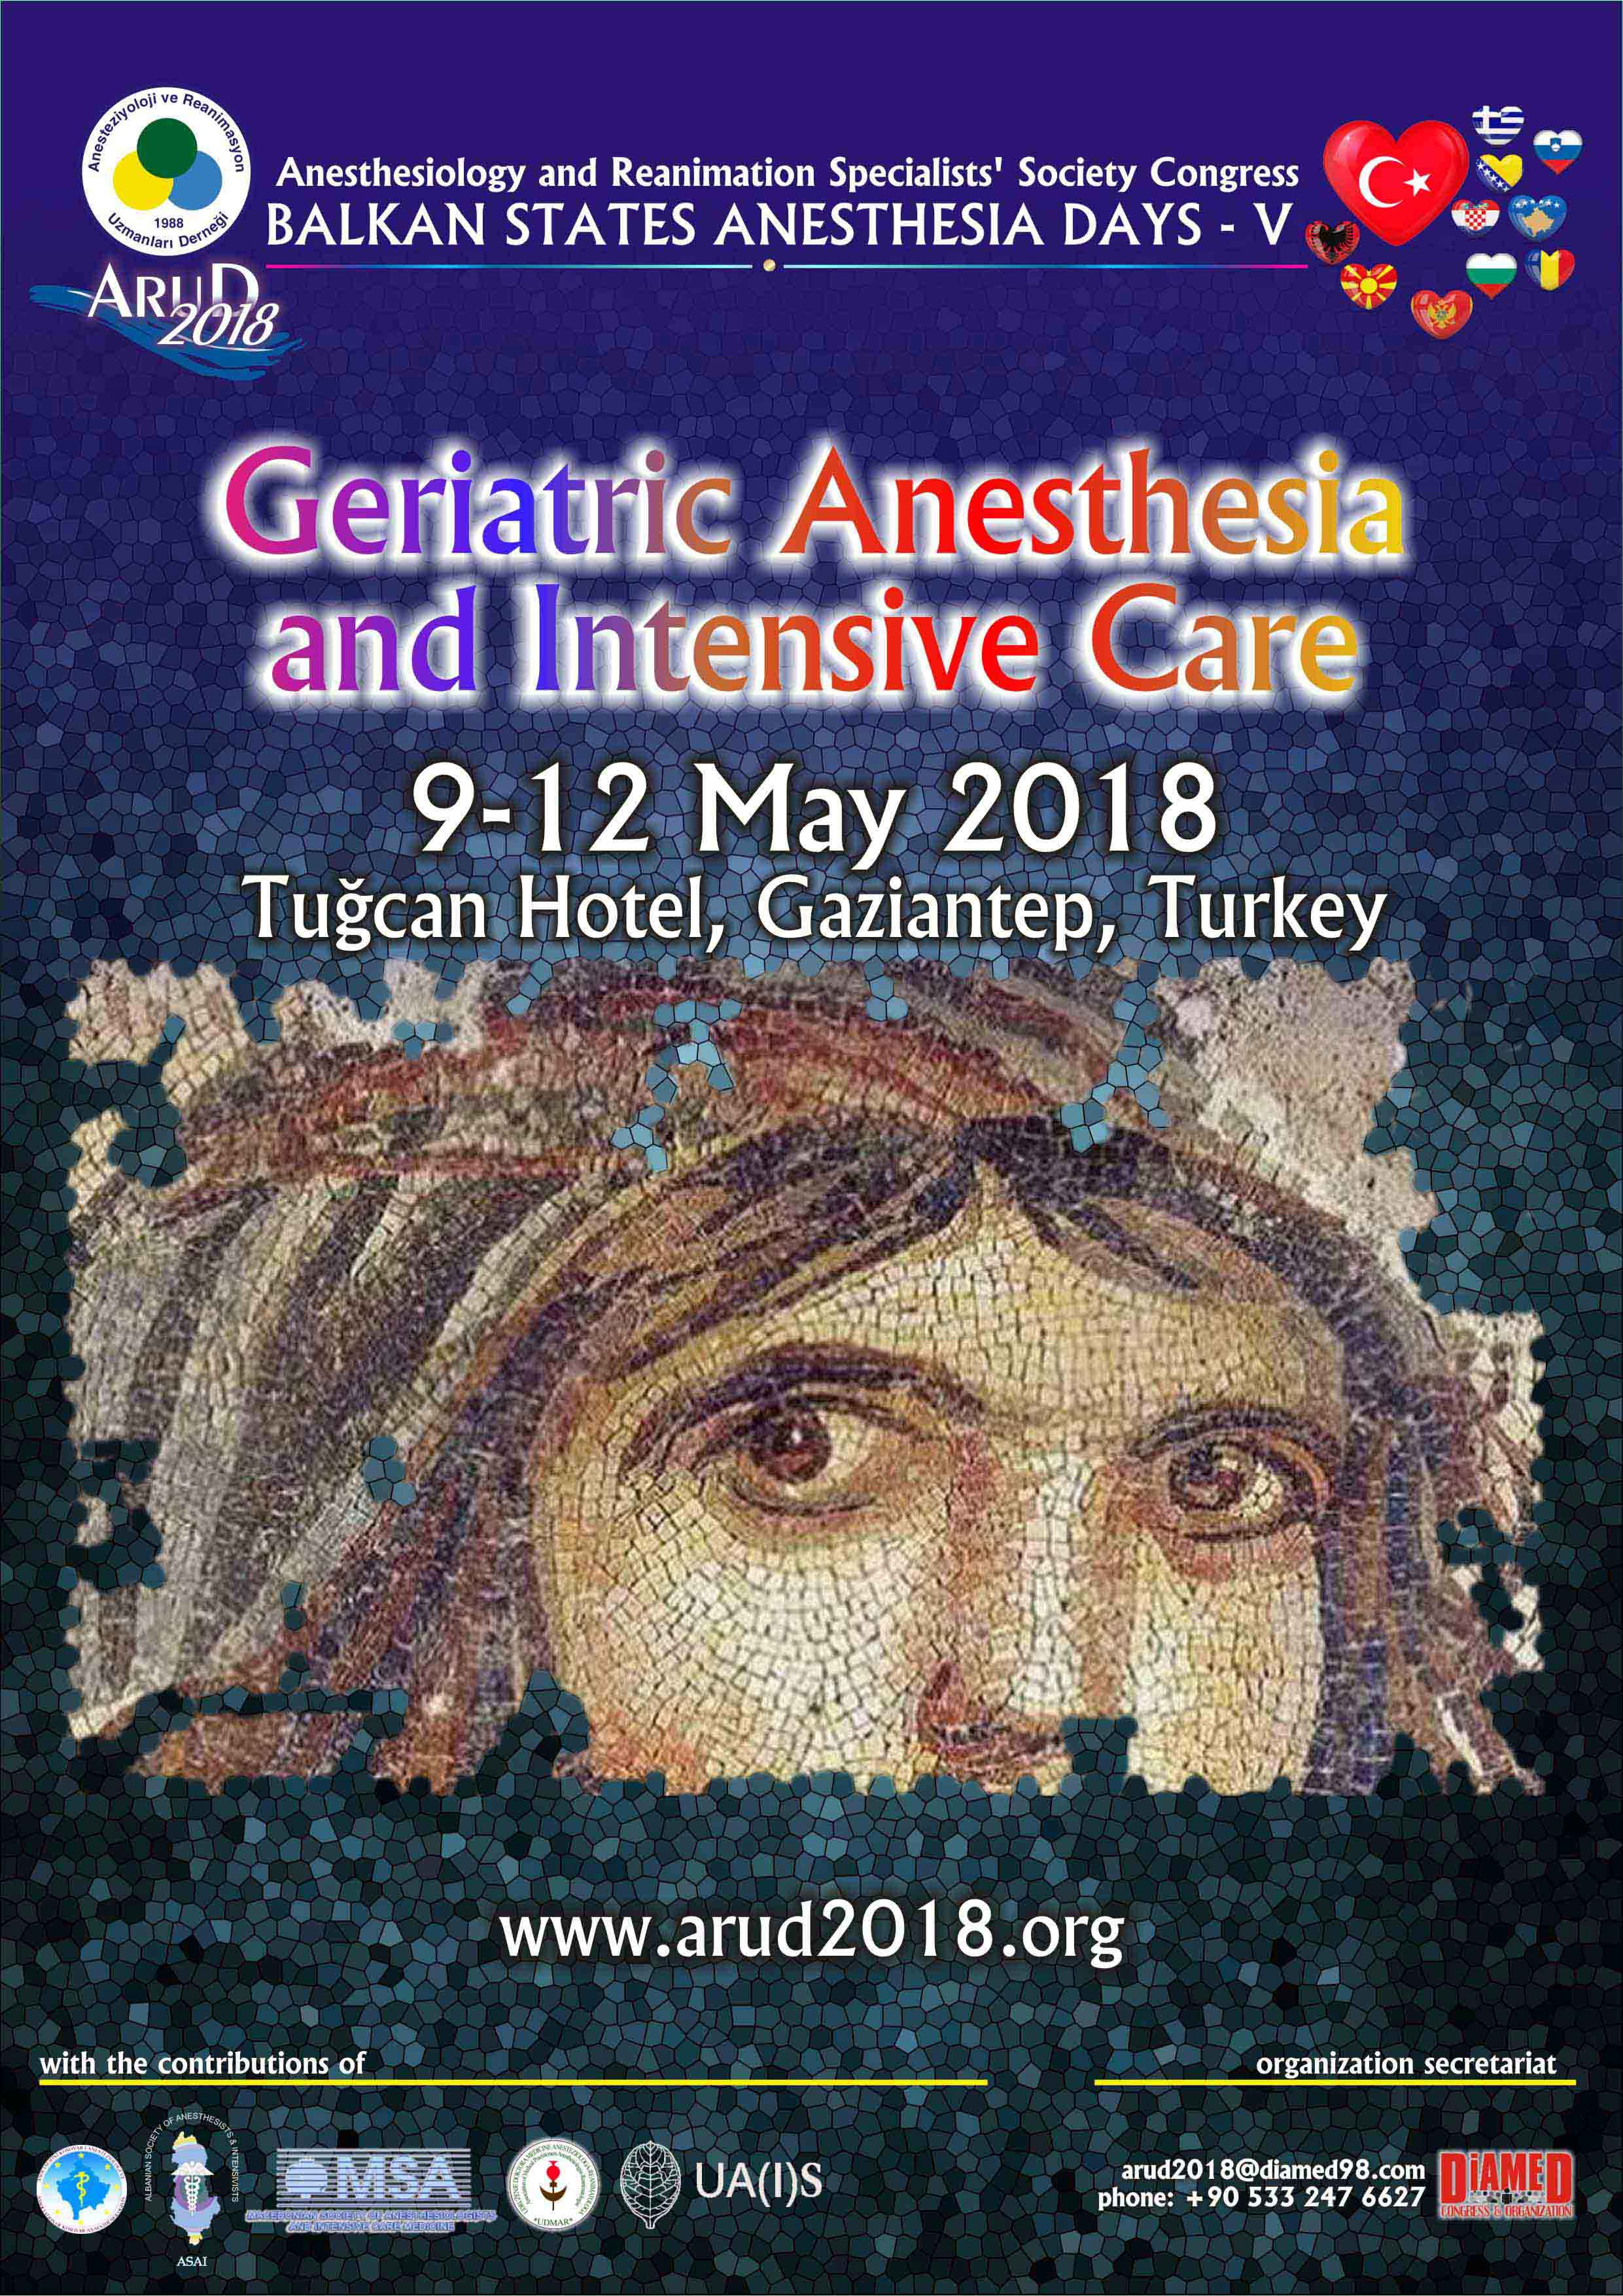 ARUD 2018 Geriatric Anesthesia and Intensive Care